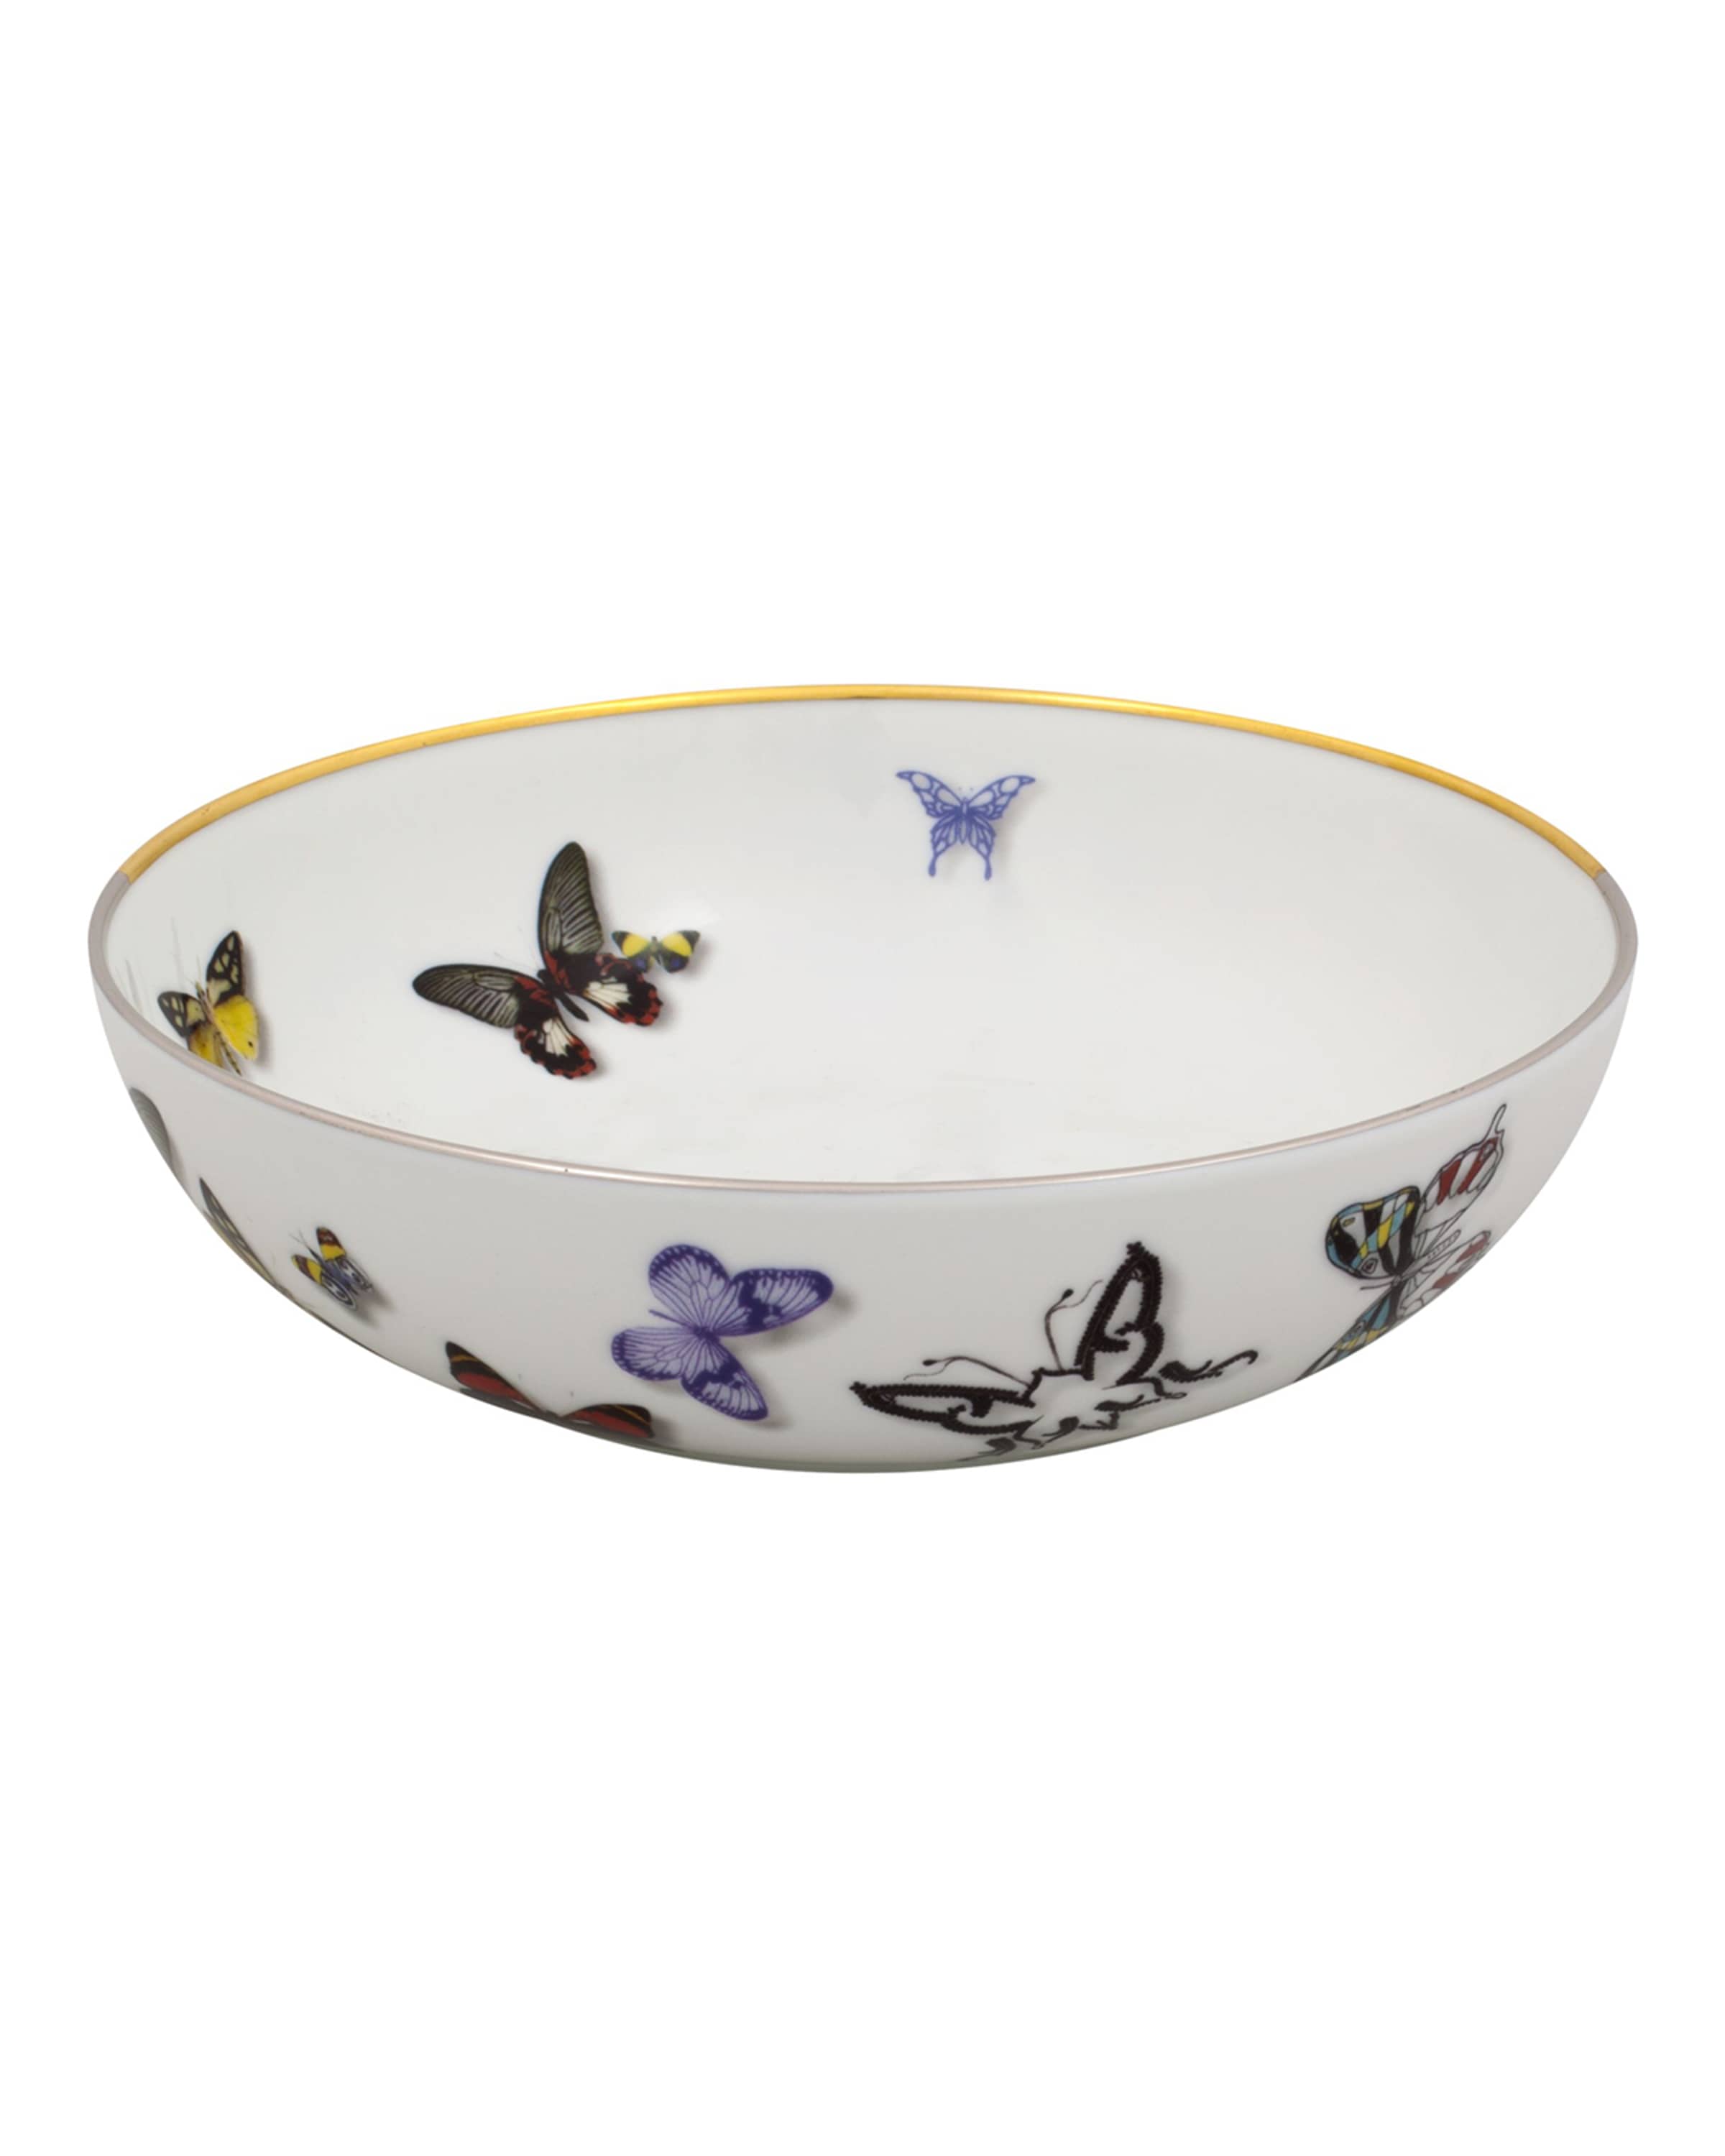 Christian LaCroix X Vista Alegre Butterfly Parade Cereal Bowls, Set of 4